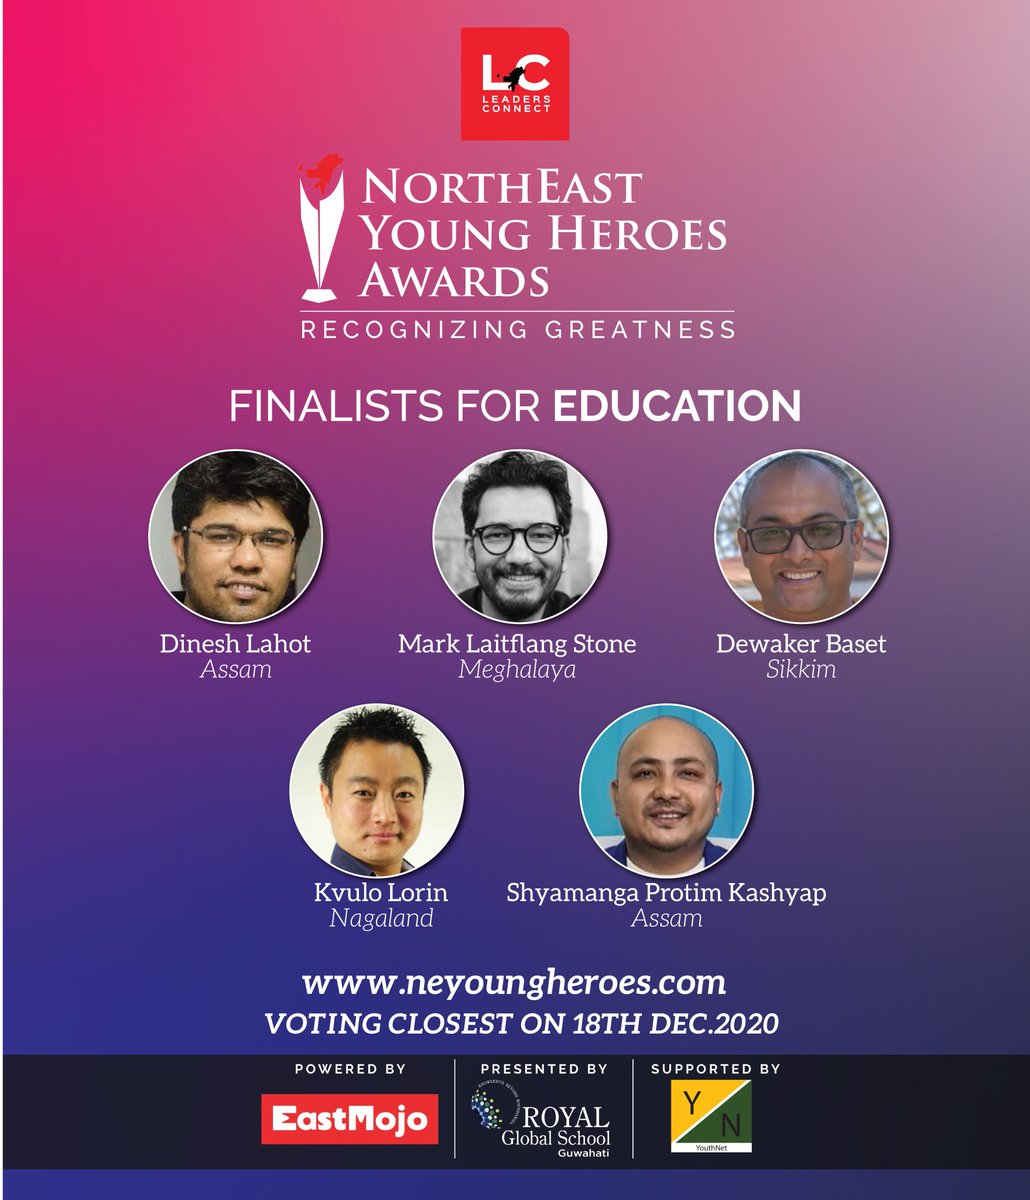 Northeast Young Heroes Award 2020 Finalists for the category of Music & Entertainment, Entrepreneurship, Global Northeast India & Education. Vote for your young heroes at neyoungheroes.com/vote-now/ 
#NortheastYoungHeroesAward2020 #EastMojo #YouthNet #RoyalGlobalSchoolGuwahati #LC